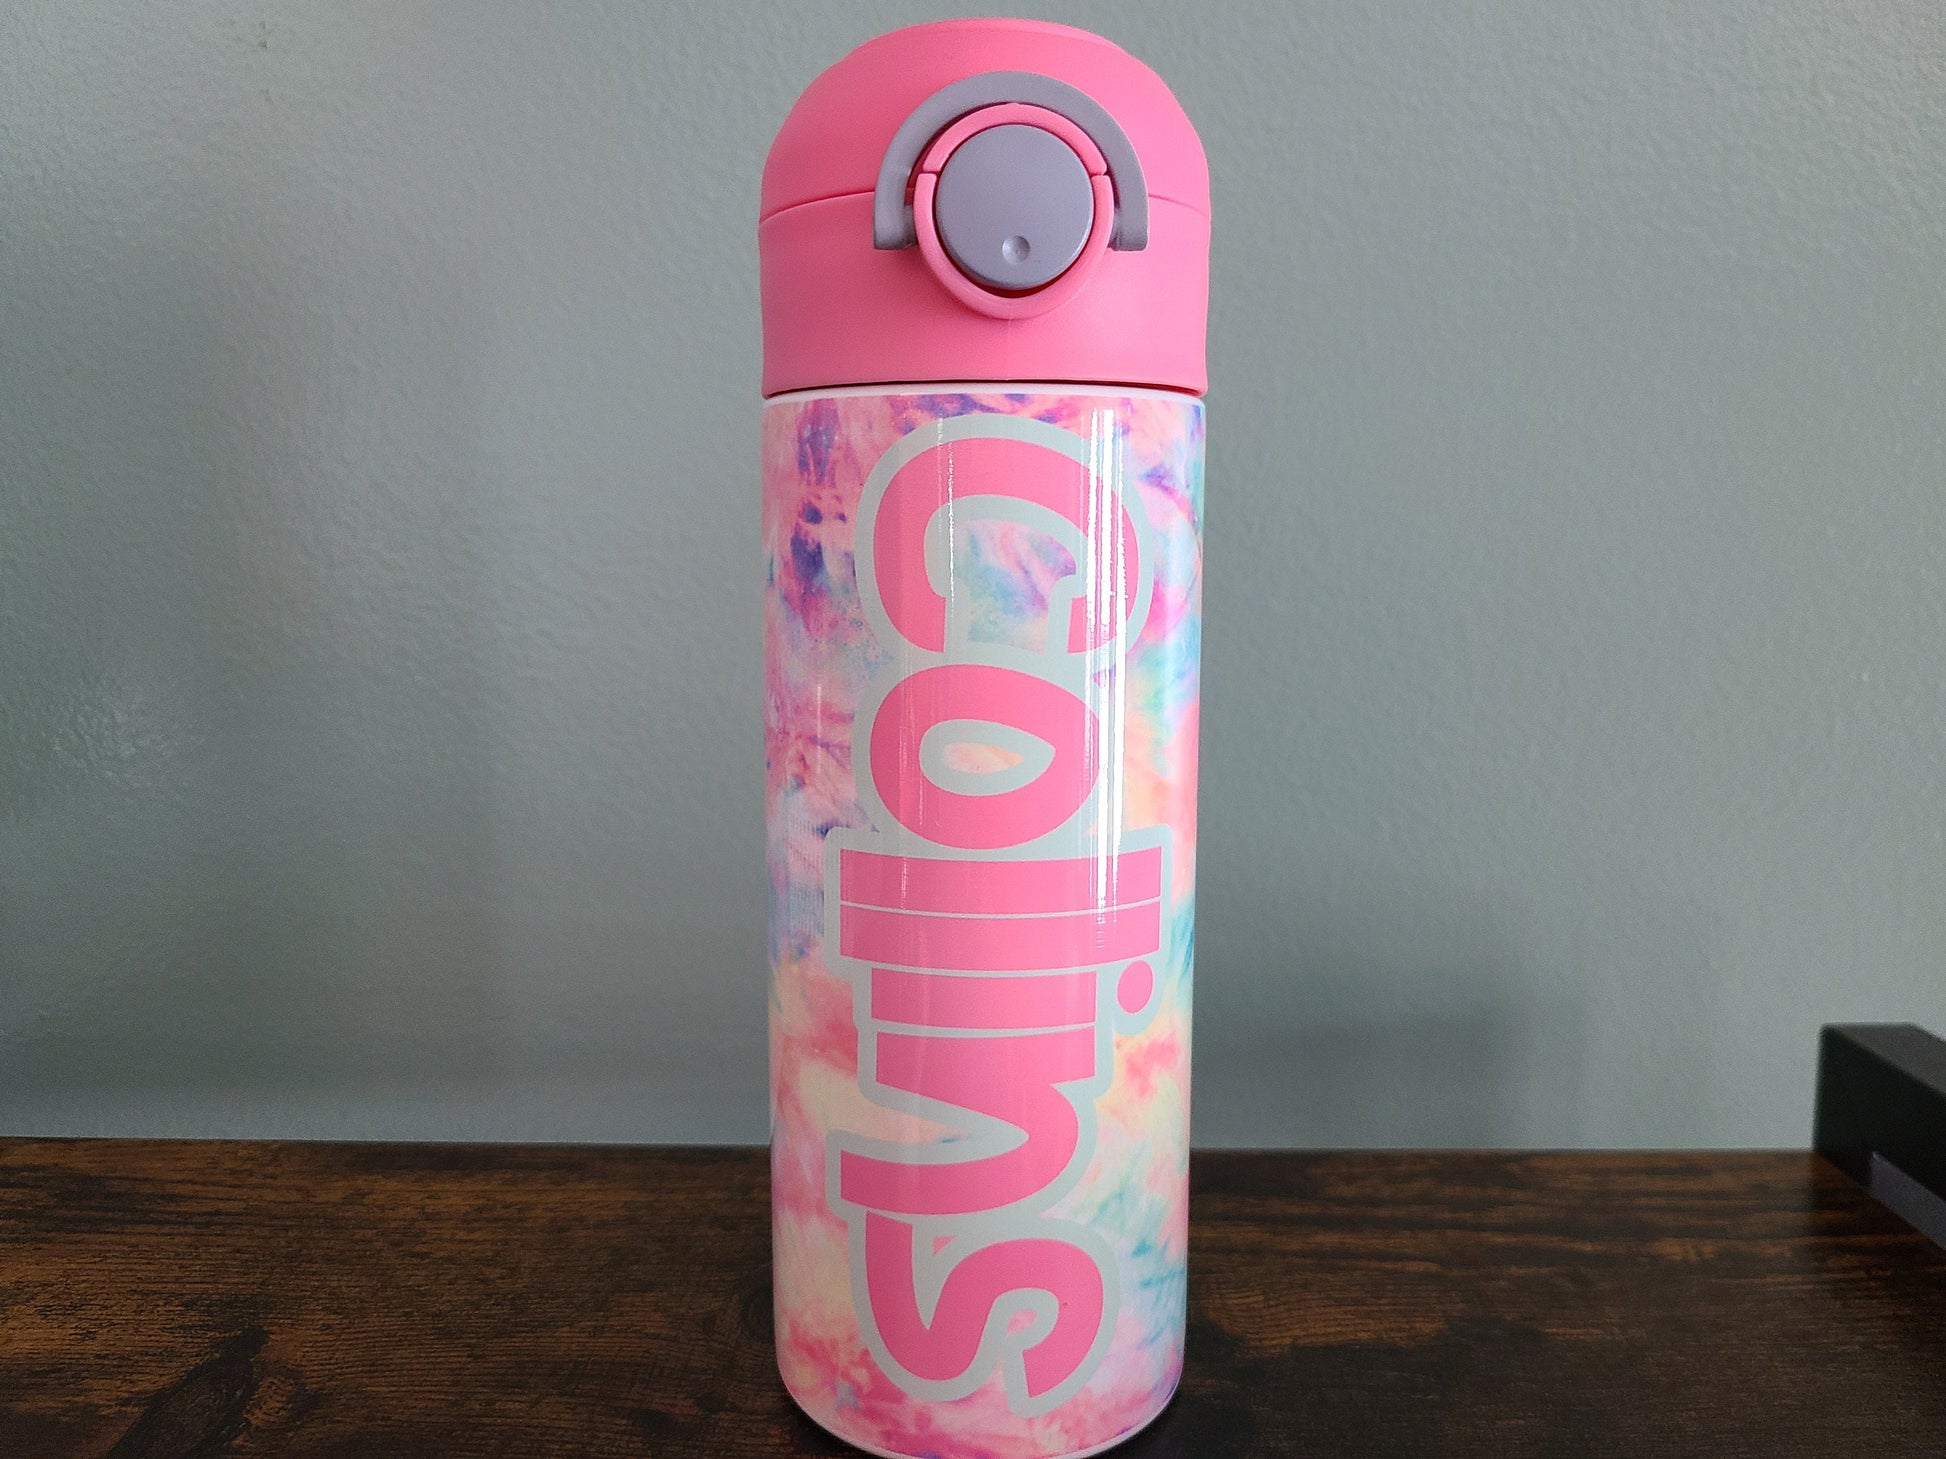 12 oz water bottle with flip top and built in straw. Pink tie dye themed water bottle for kids. Back to school water bottle for kids. Tie dye in pastel colors with a name in pink and pink lid.